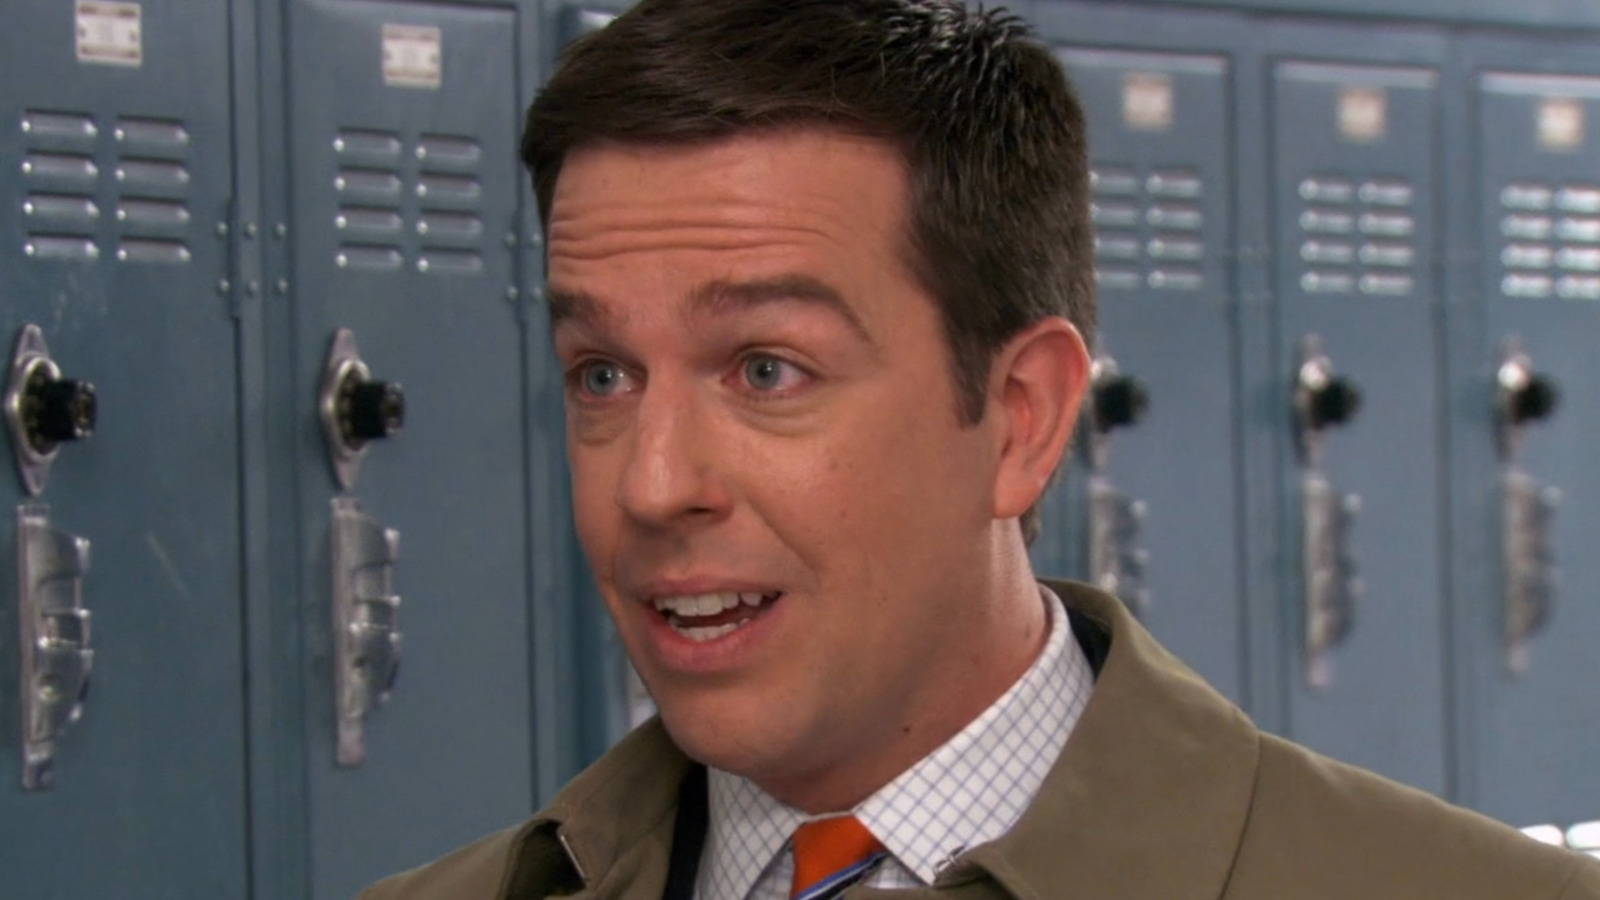 The Office: Superfans Episodes Show That Andy Is Worse Than You Think